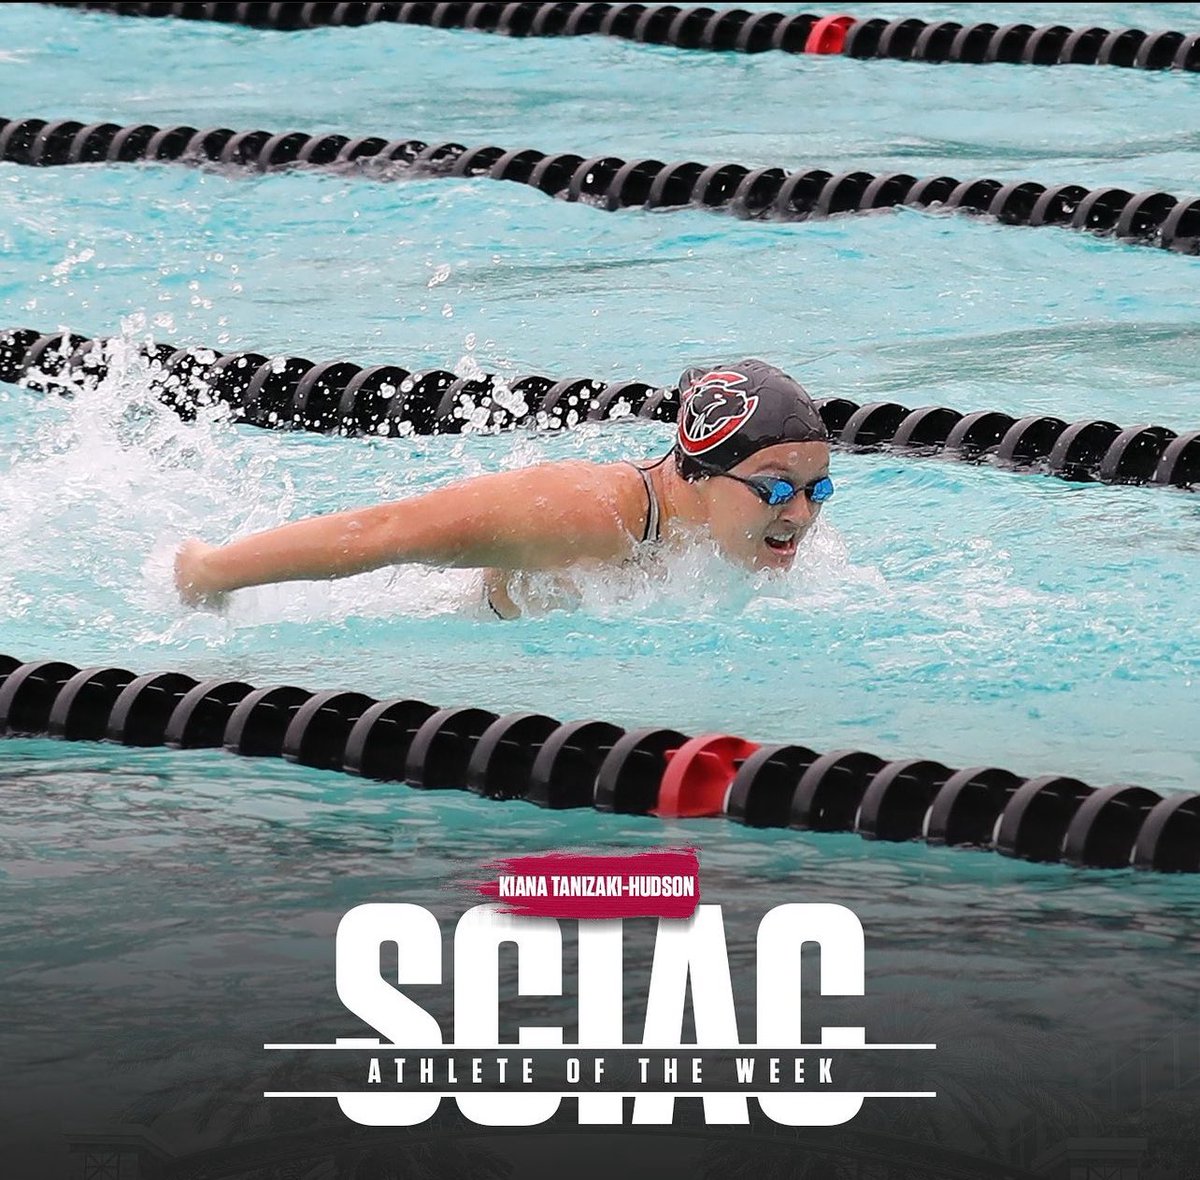 SCIAC athlete Kiana Tanizaki-Hudson has been dominant all season in the pool but is so much more! Tune in to our podcast coming soon where we chat with her on Panther Insider! #dodgemojo